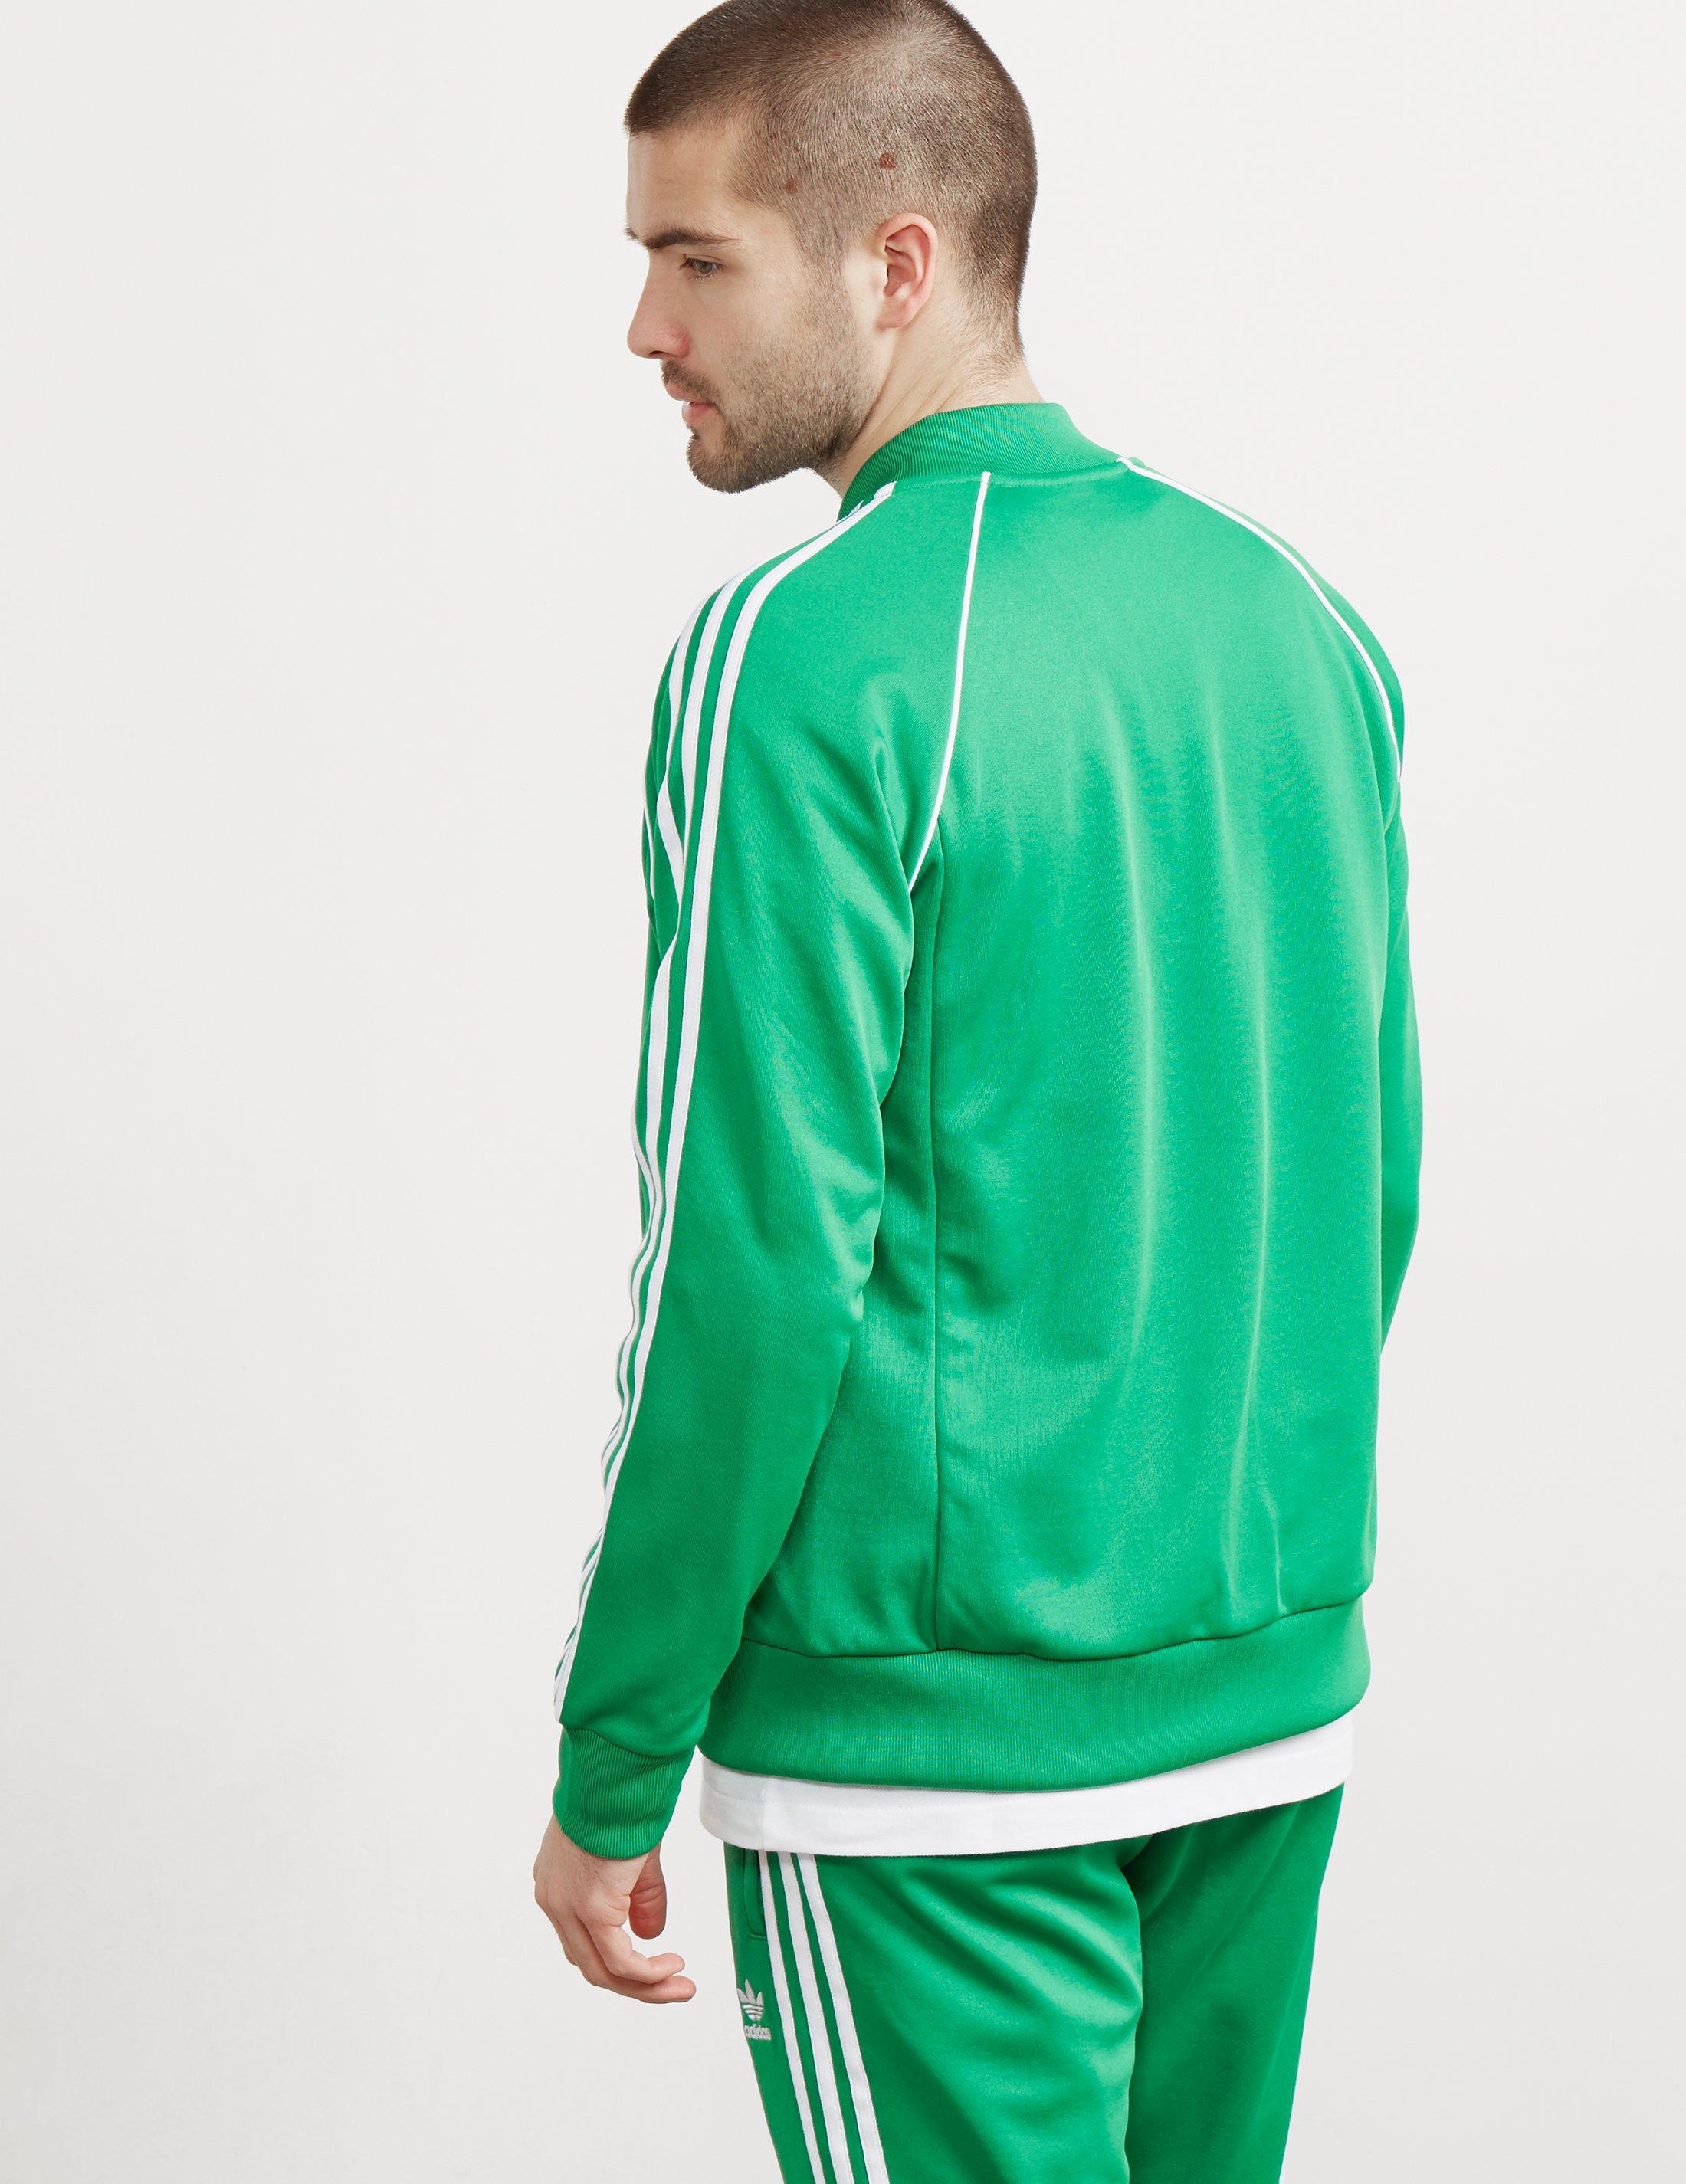 adidas - court superstar track top in green/white